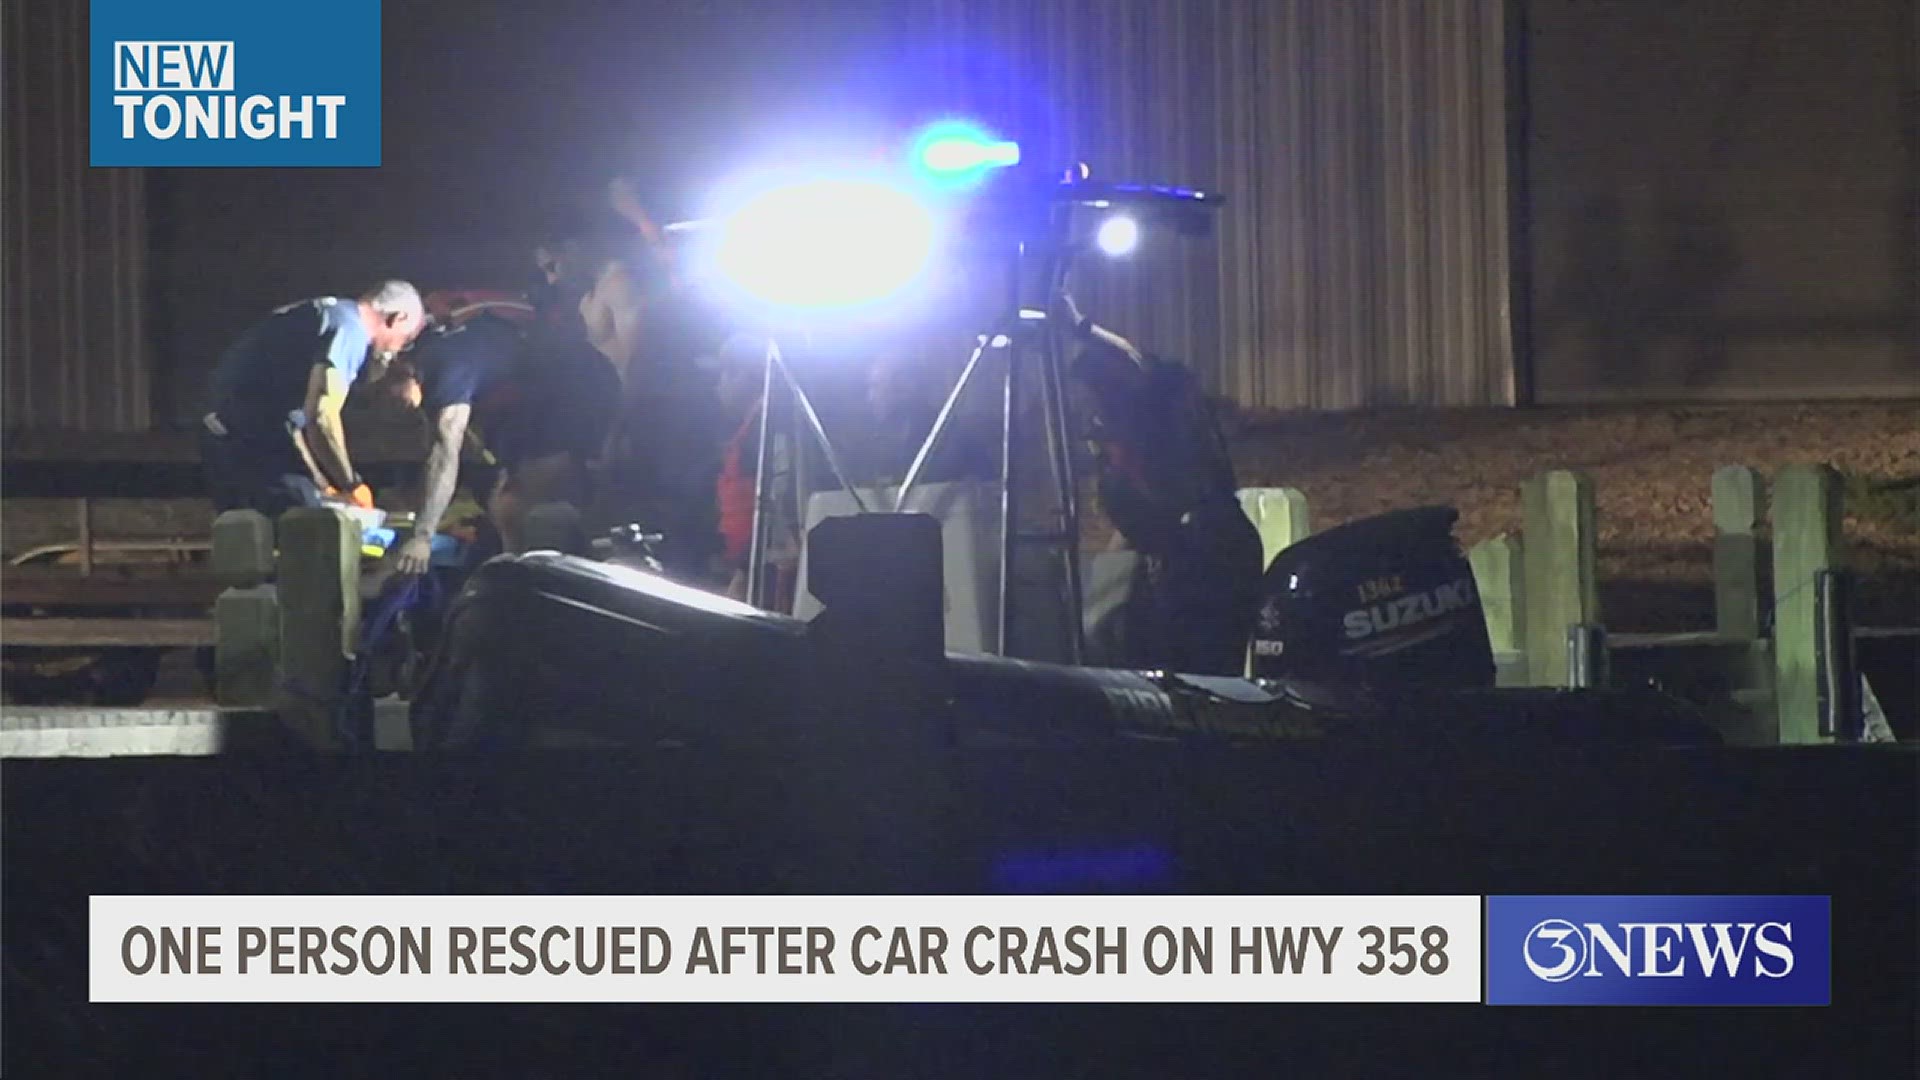 Two vehicles crashed into each other, with one swerving into the water, resulting in a rescue.